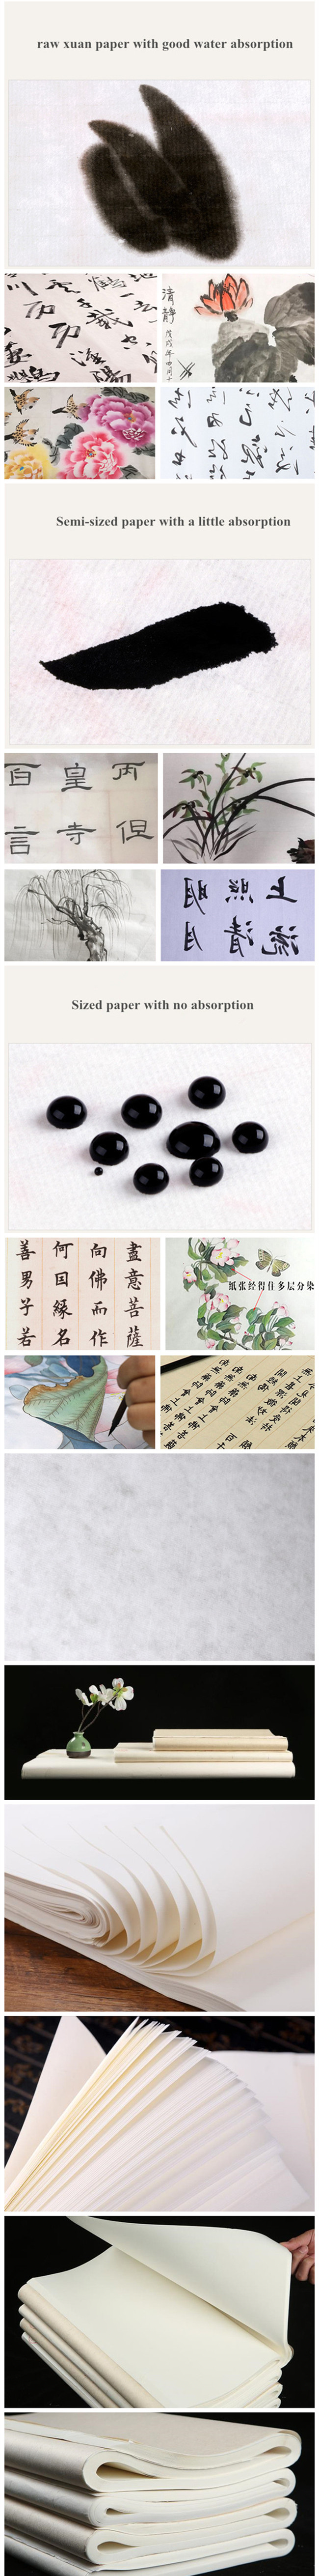 A- HM004 Single Layer Xuan Paper 100 Sheets [HM004] - $35.99 : hmay rice  paper manufacturer for calligraphy, brush painting&Chinese painting